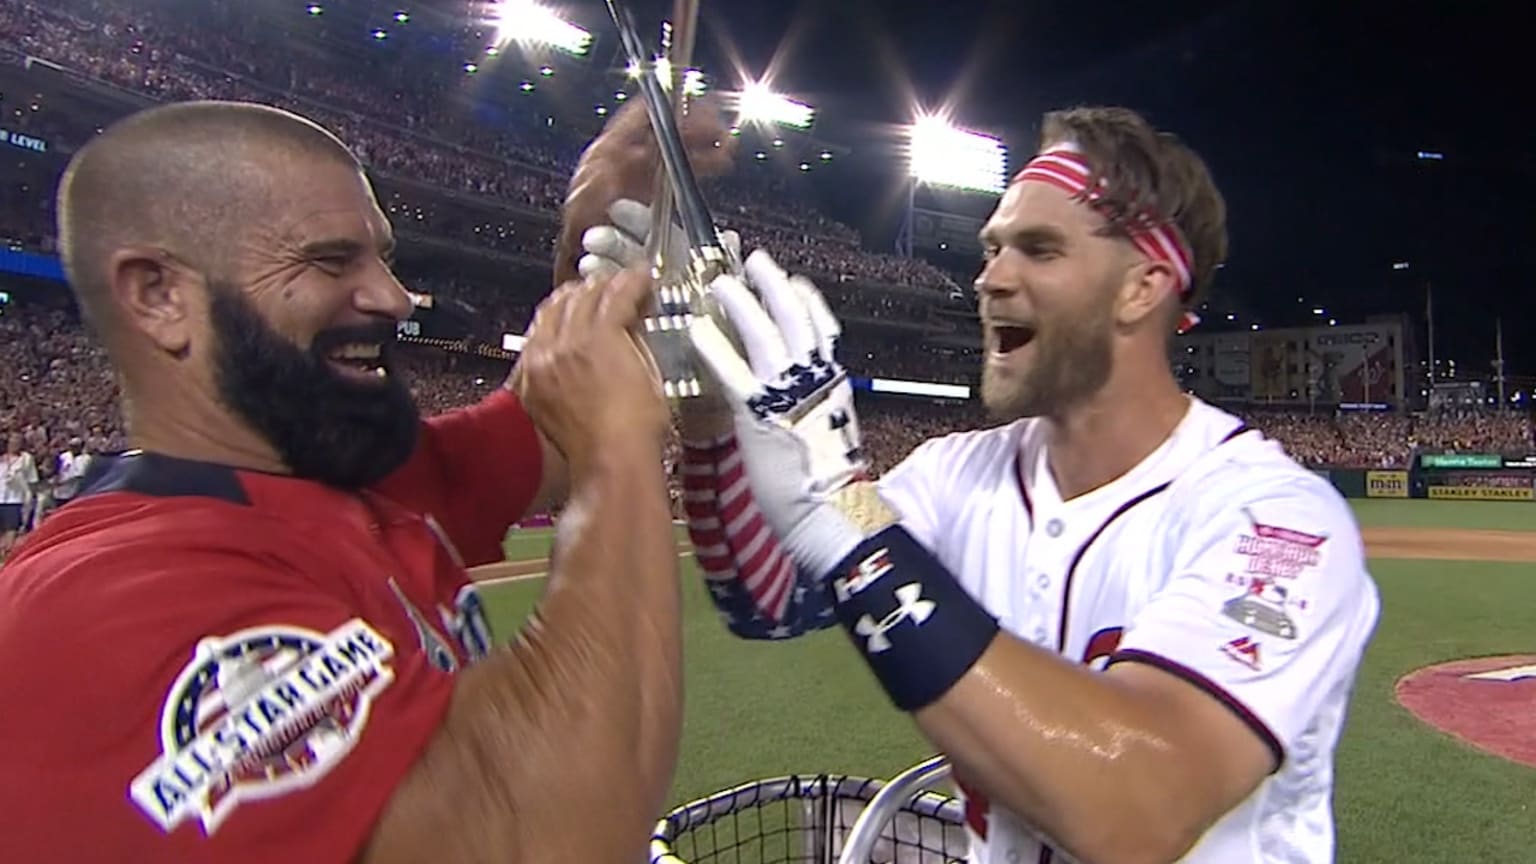 MLB Home Run Derby 2018: Bryce Harper, muscular dad Ron (his pitcher) team  for 19 homers in final round 